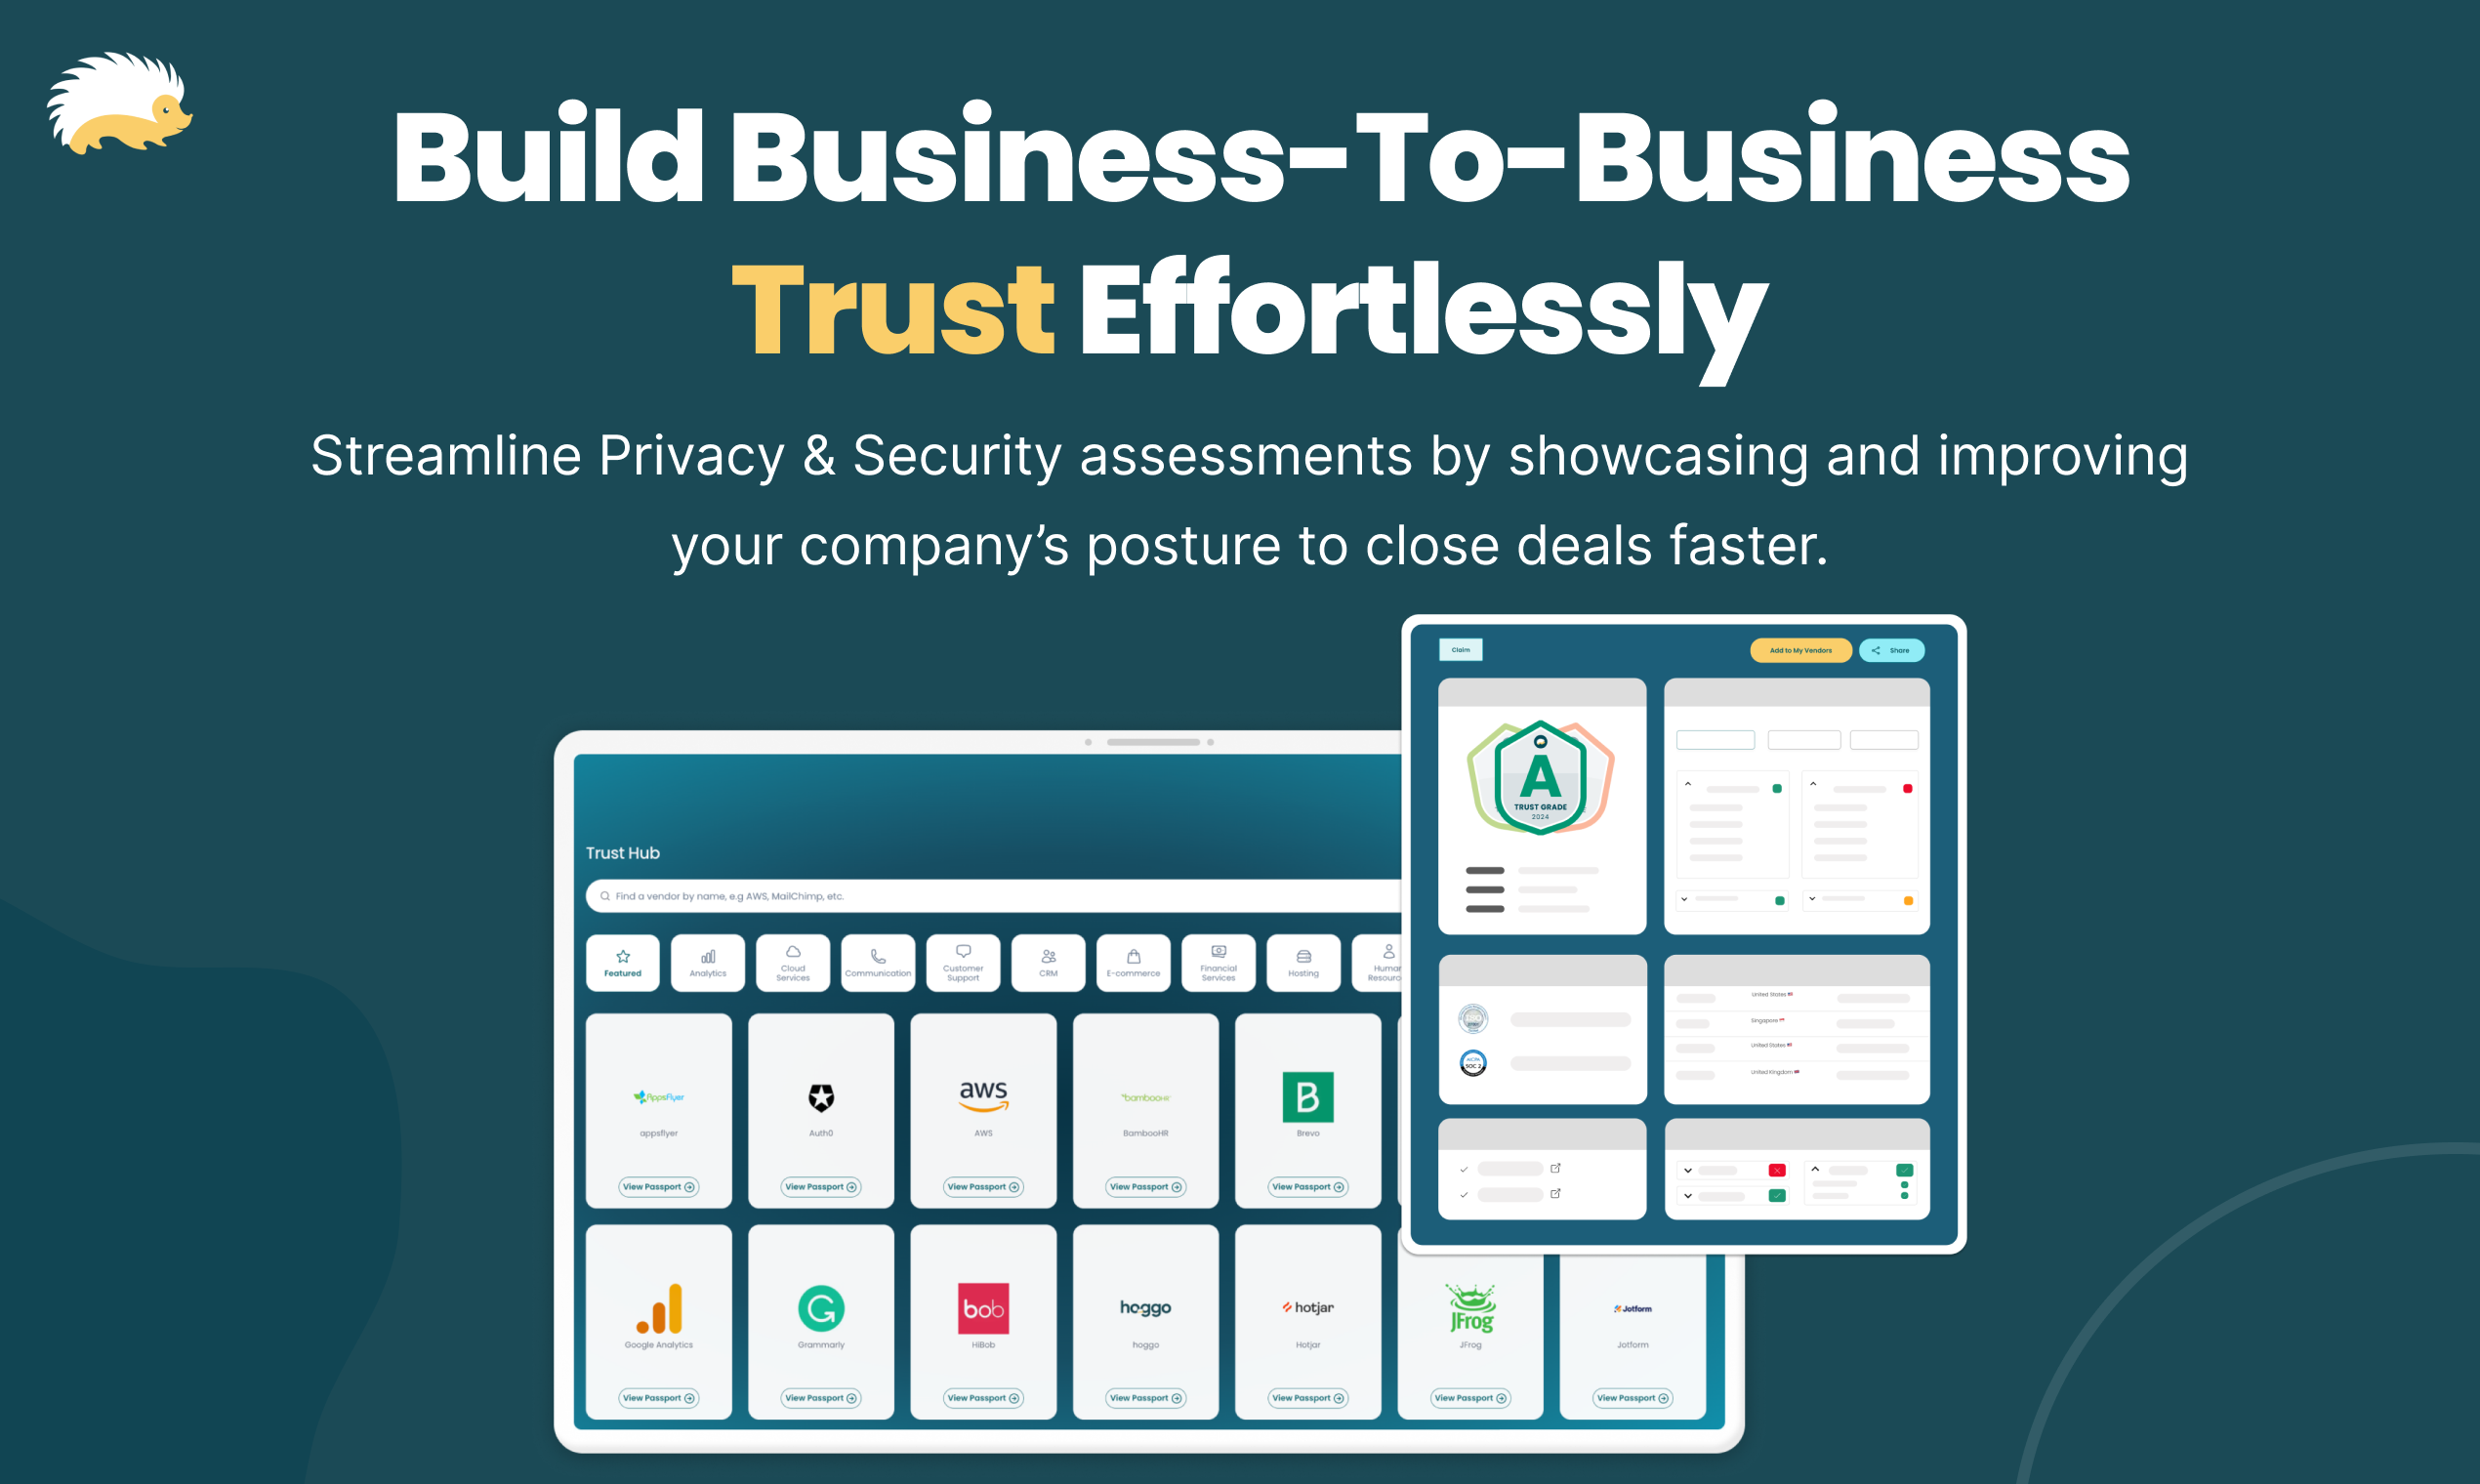 trust-hub-by-hoggo - The new standard for business-to-business (B2B) trust